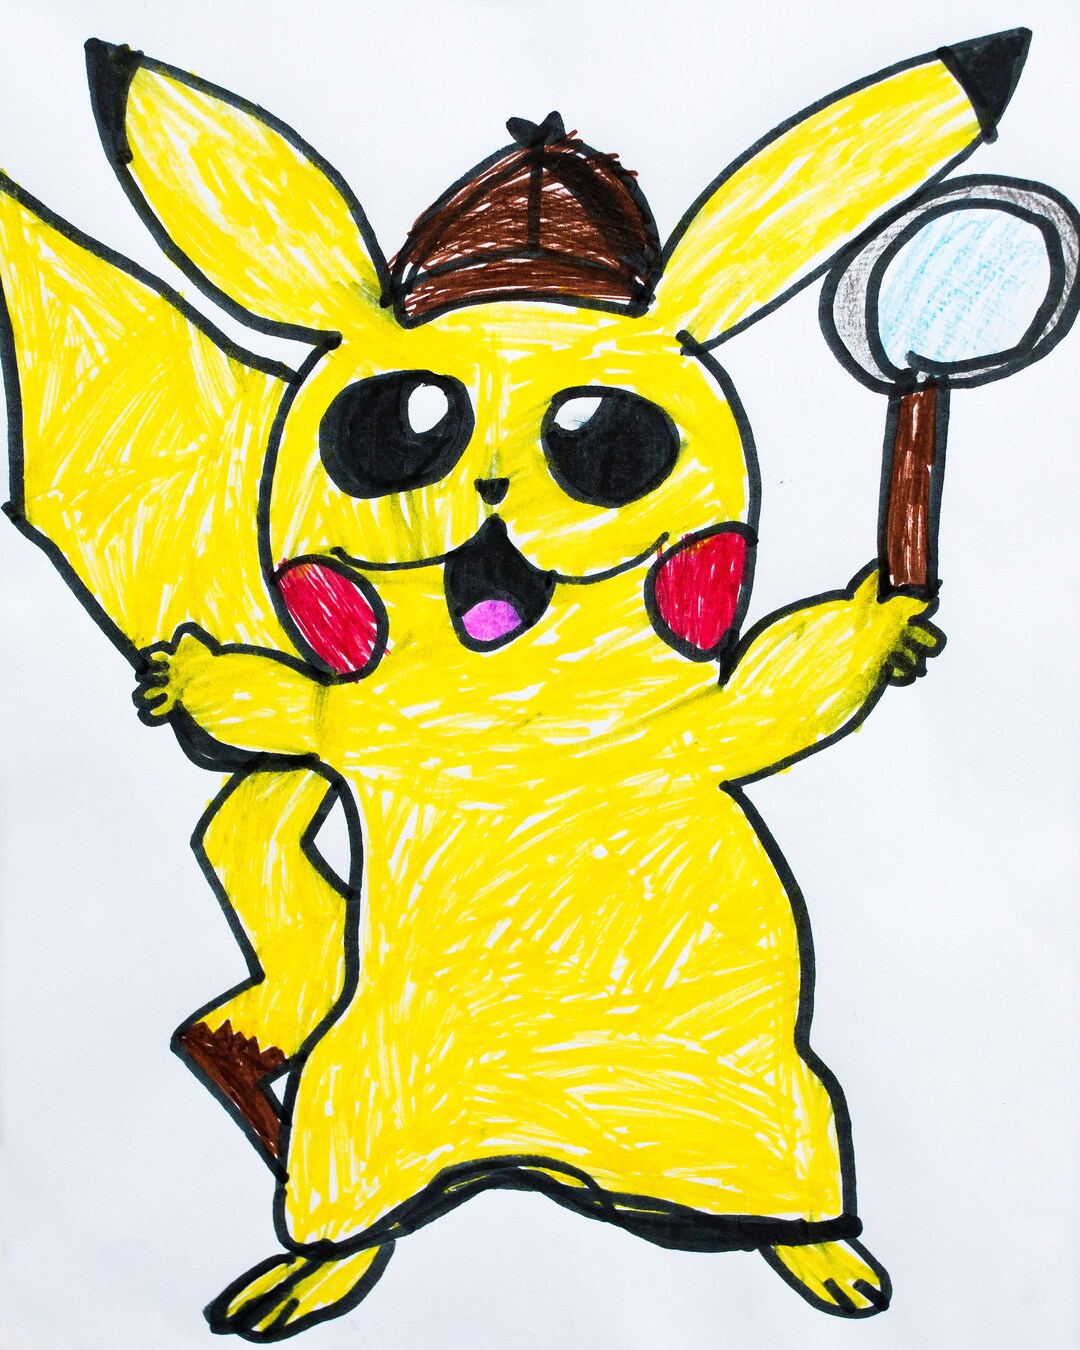 Original Detective Pikachu Drawing Size 8x10 By Etsy